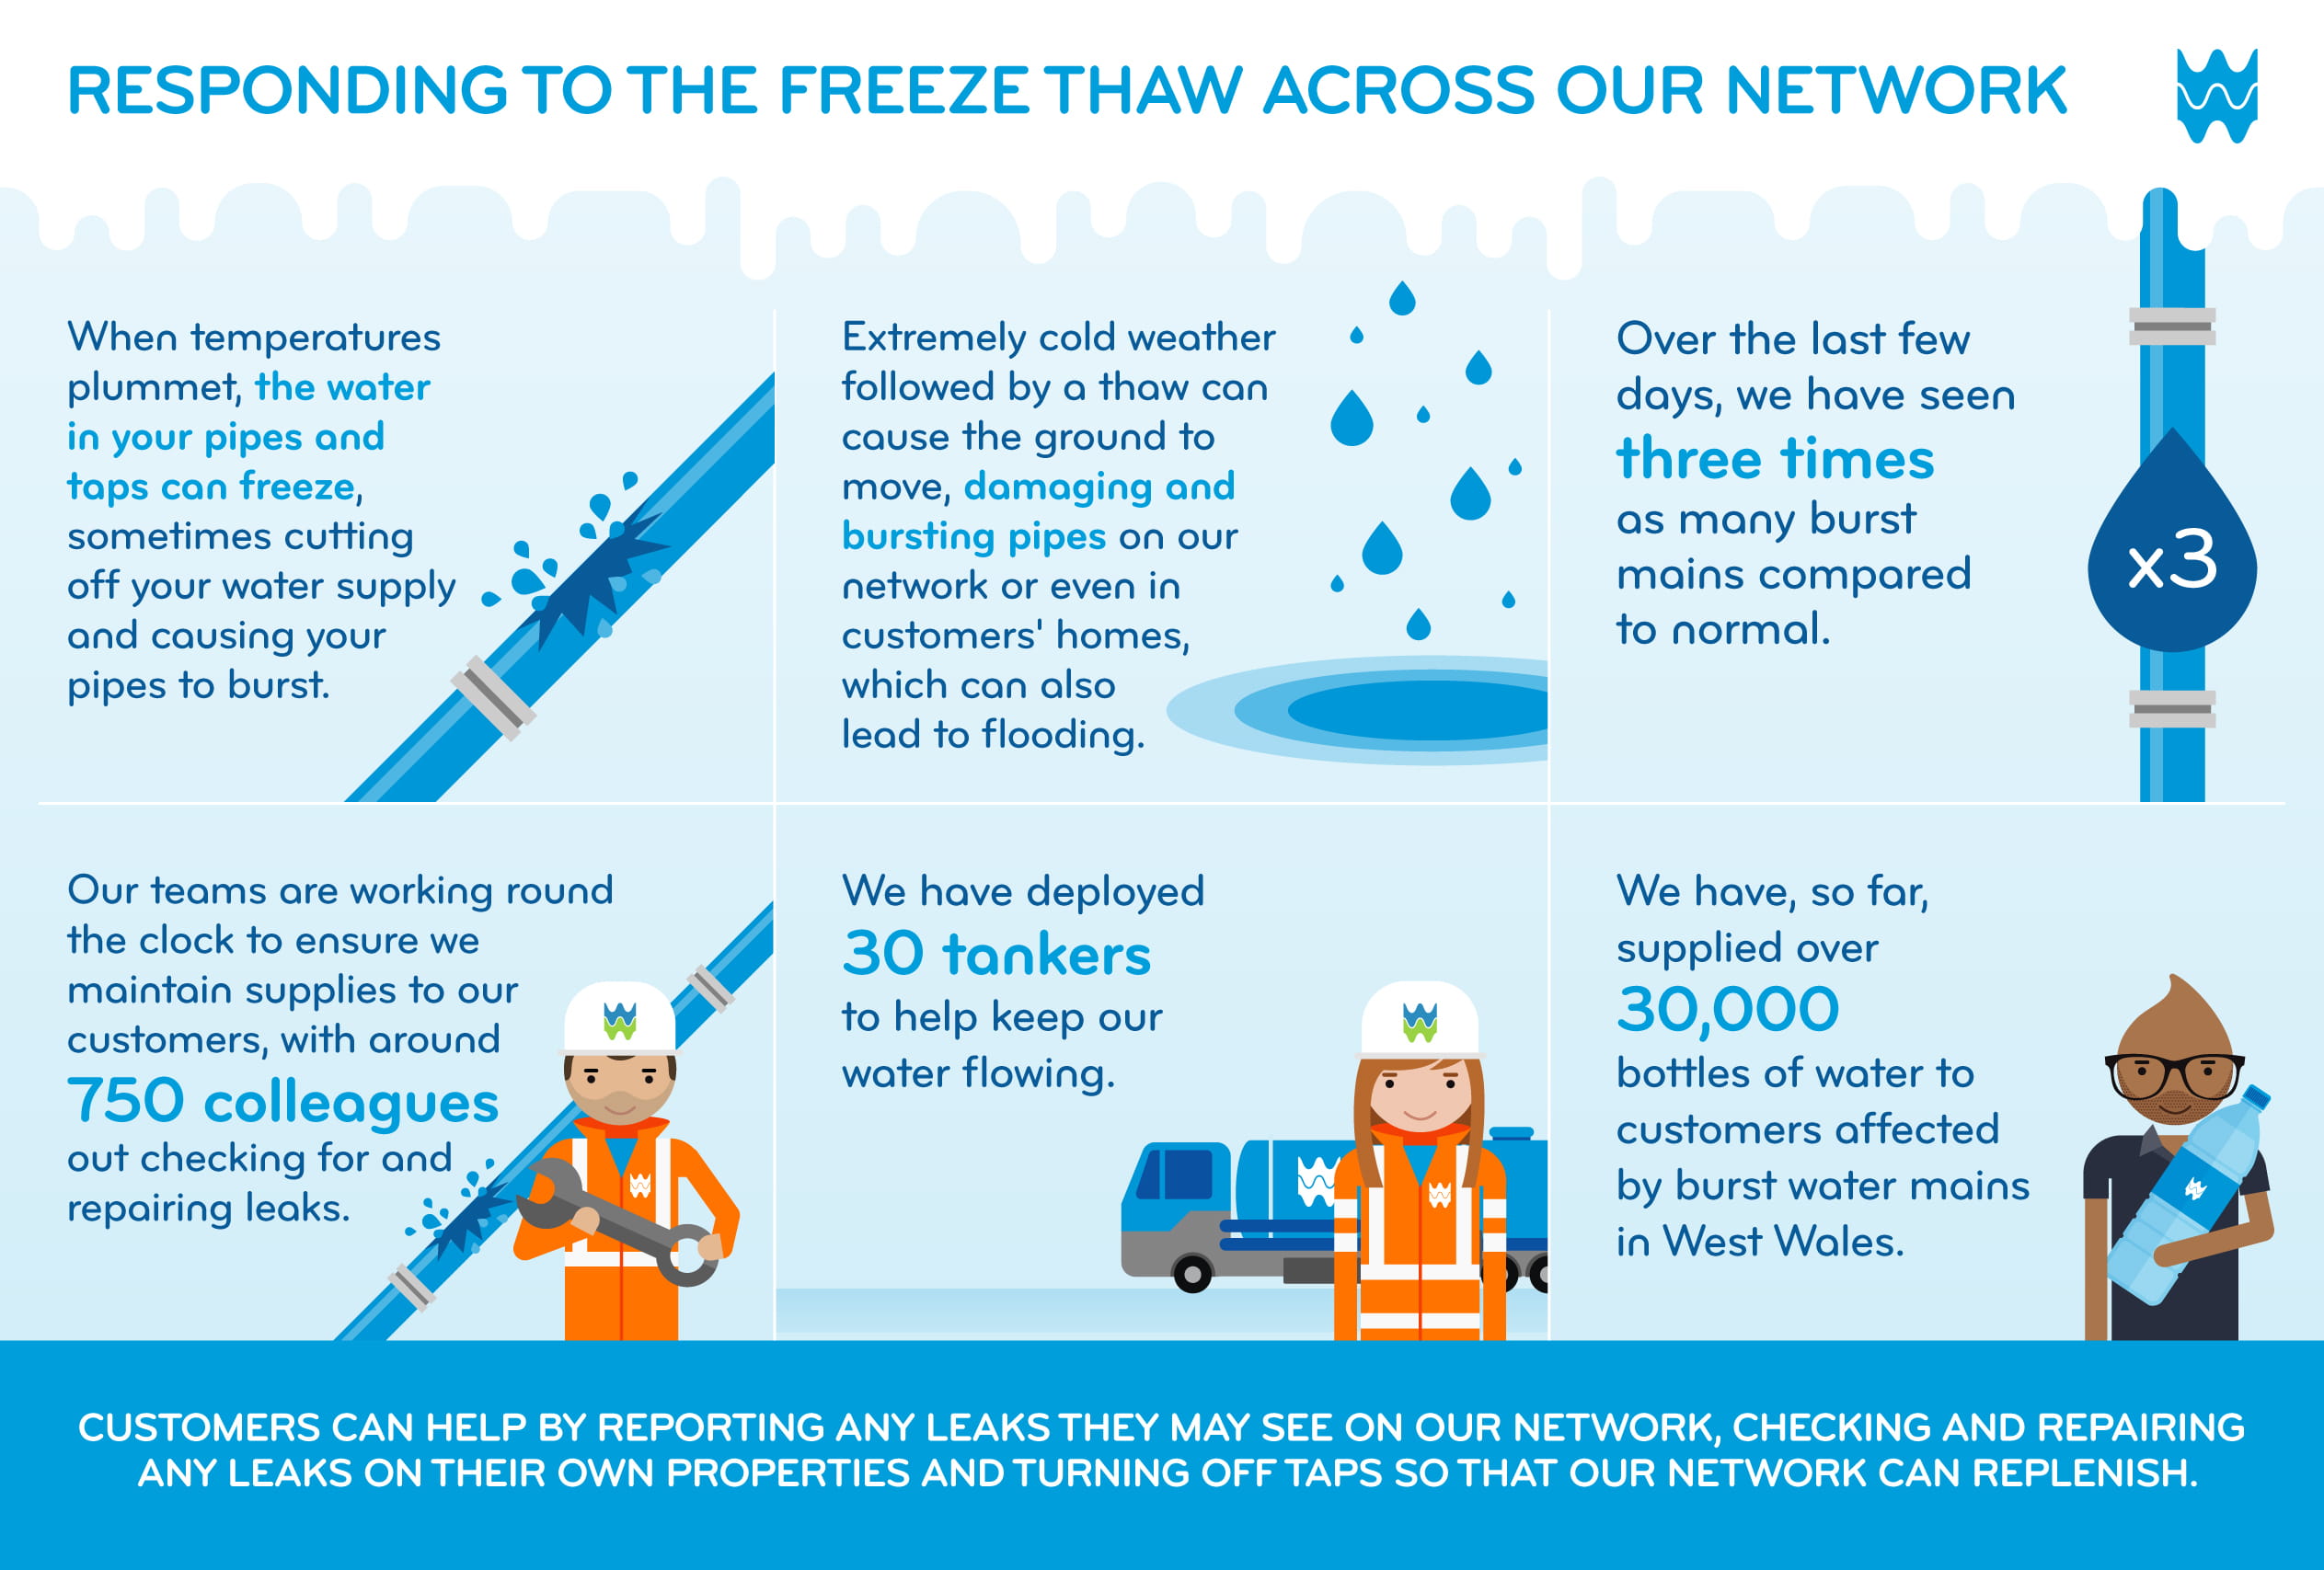 Responding to the freeze thaw across our network